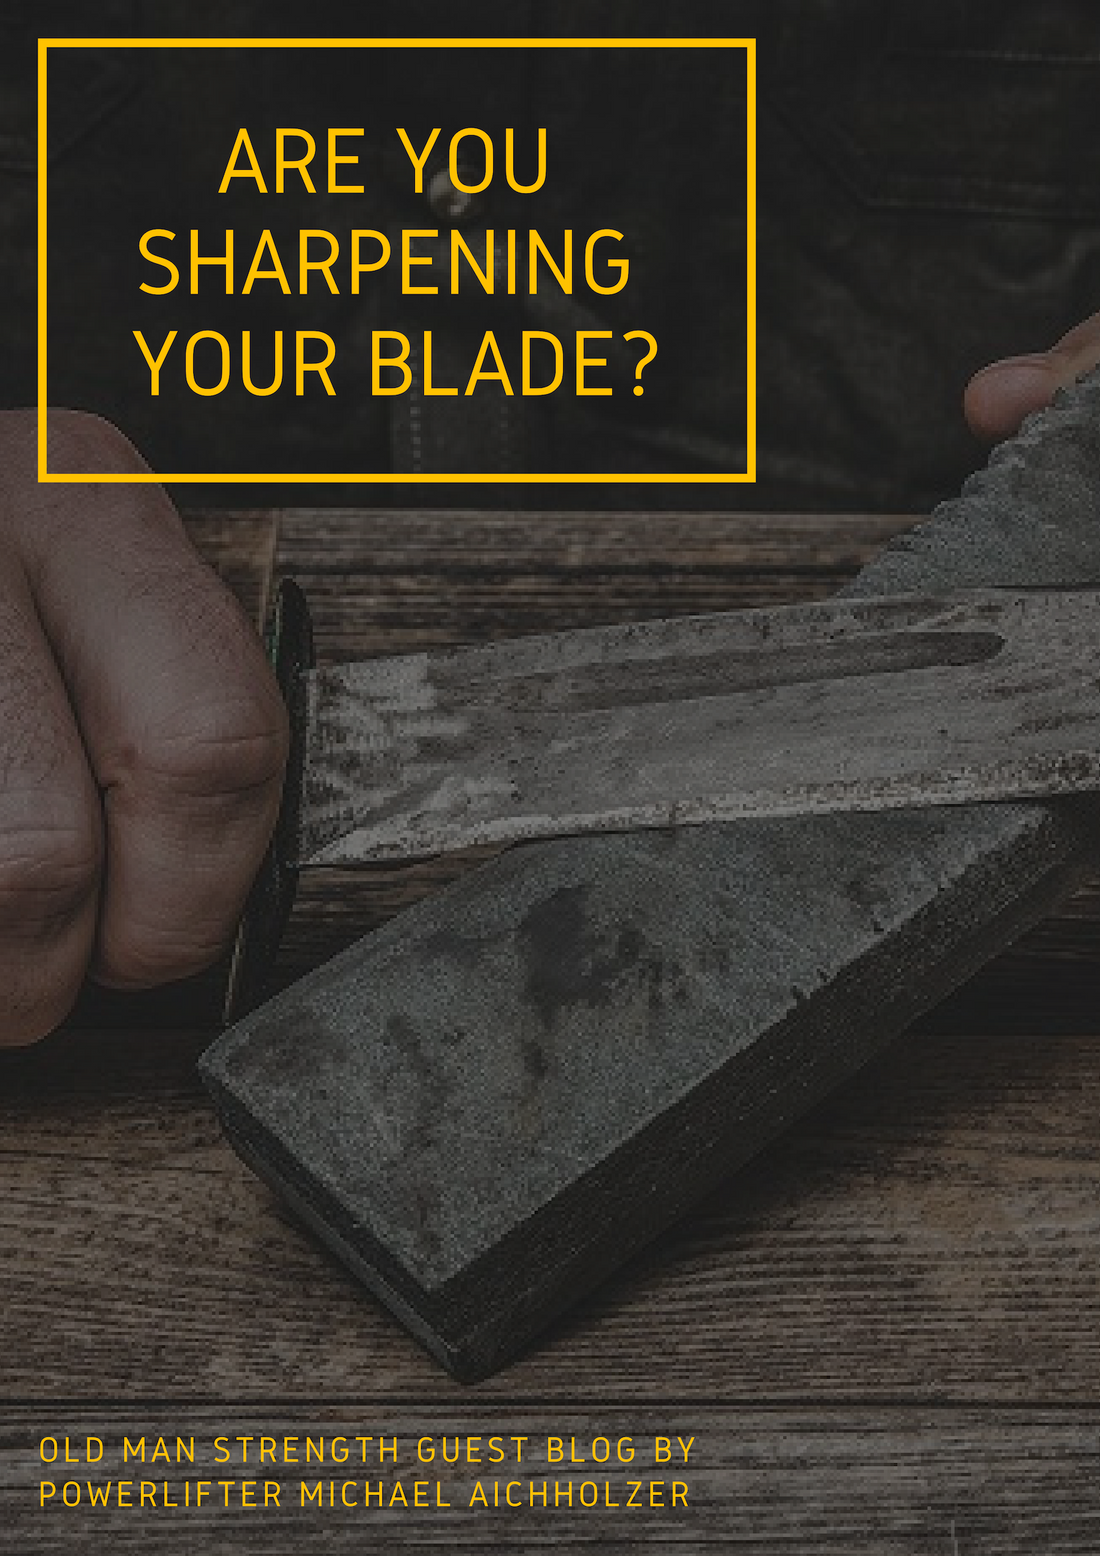 Are You Sharpening Your Blade? – Michael Aichholzer